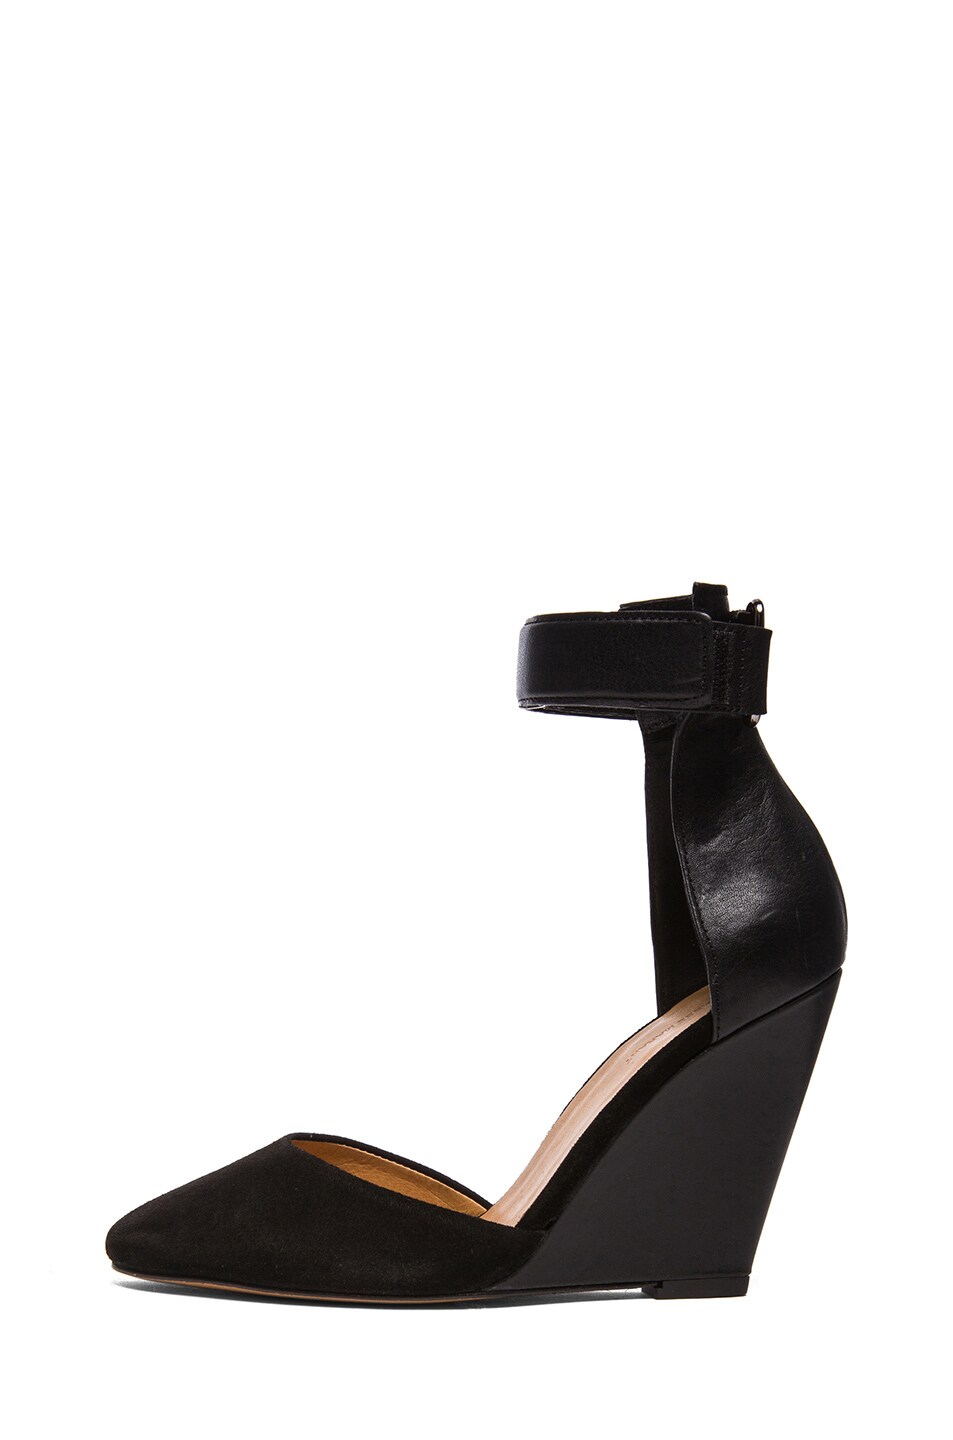 Image 1 of Isabel Marant Patty Calfskin Leather Wedge Heels in Black